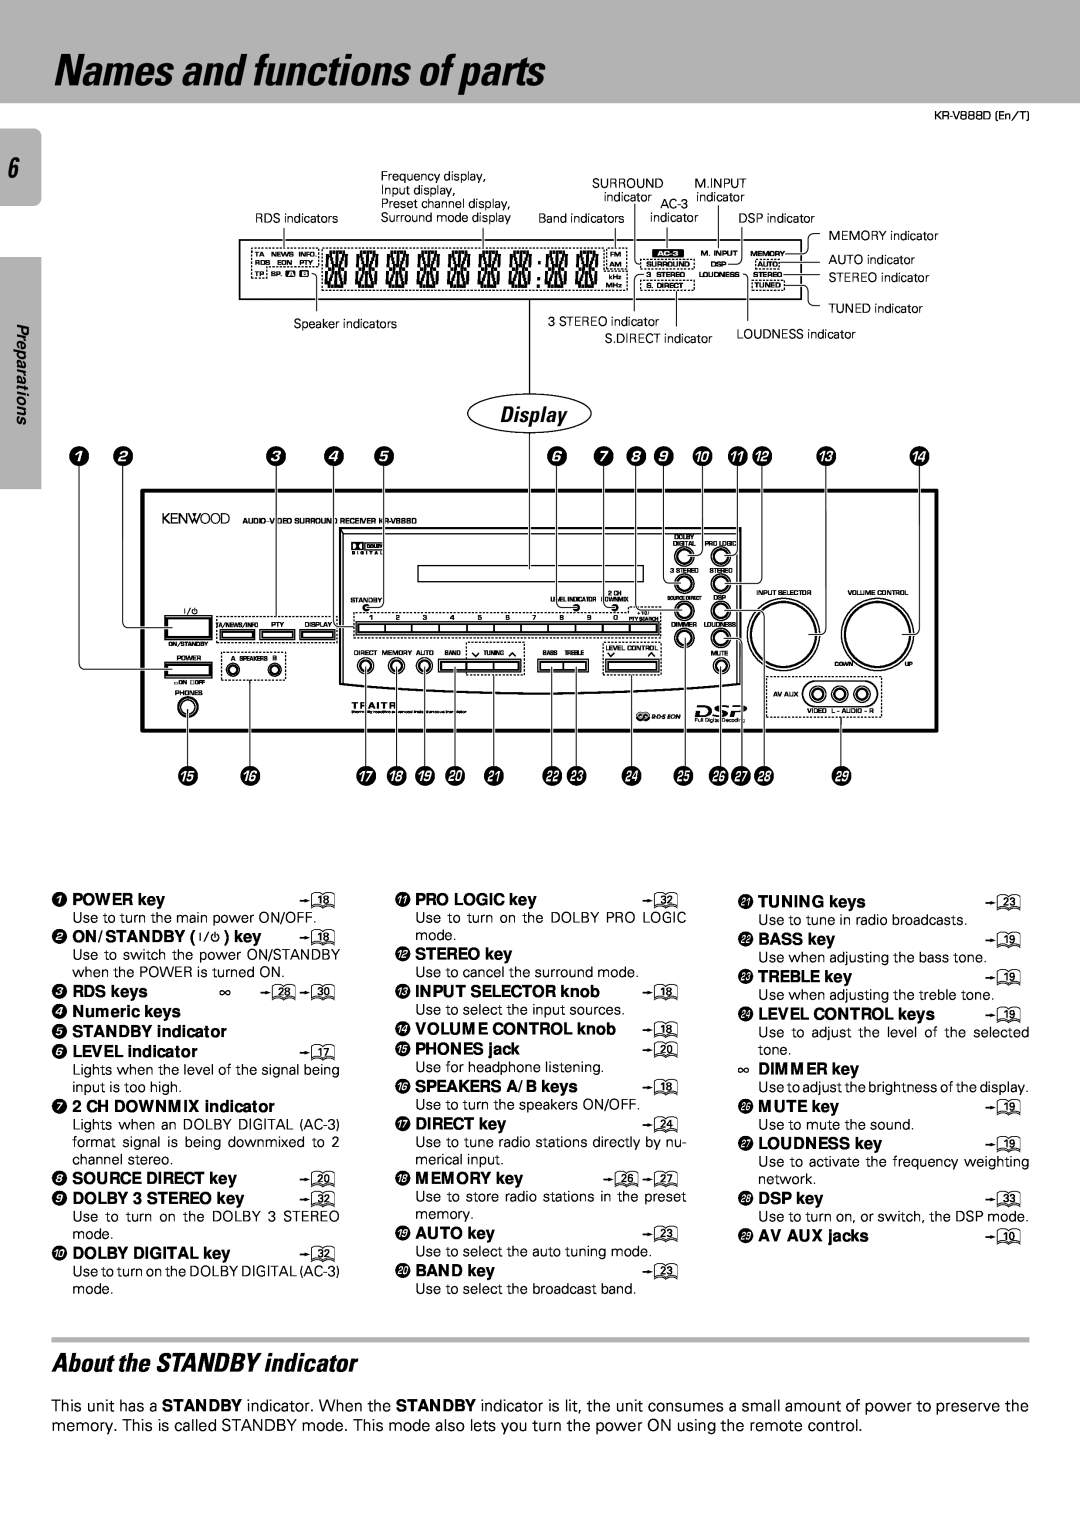 Kenwood KR-V888D instruction manual Names and functions of parts, About the STANDBY indicator, 6 7 8 9 0 !@ #, Á ª£ ¢ ¤¥ » 